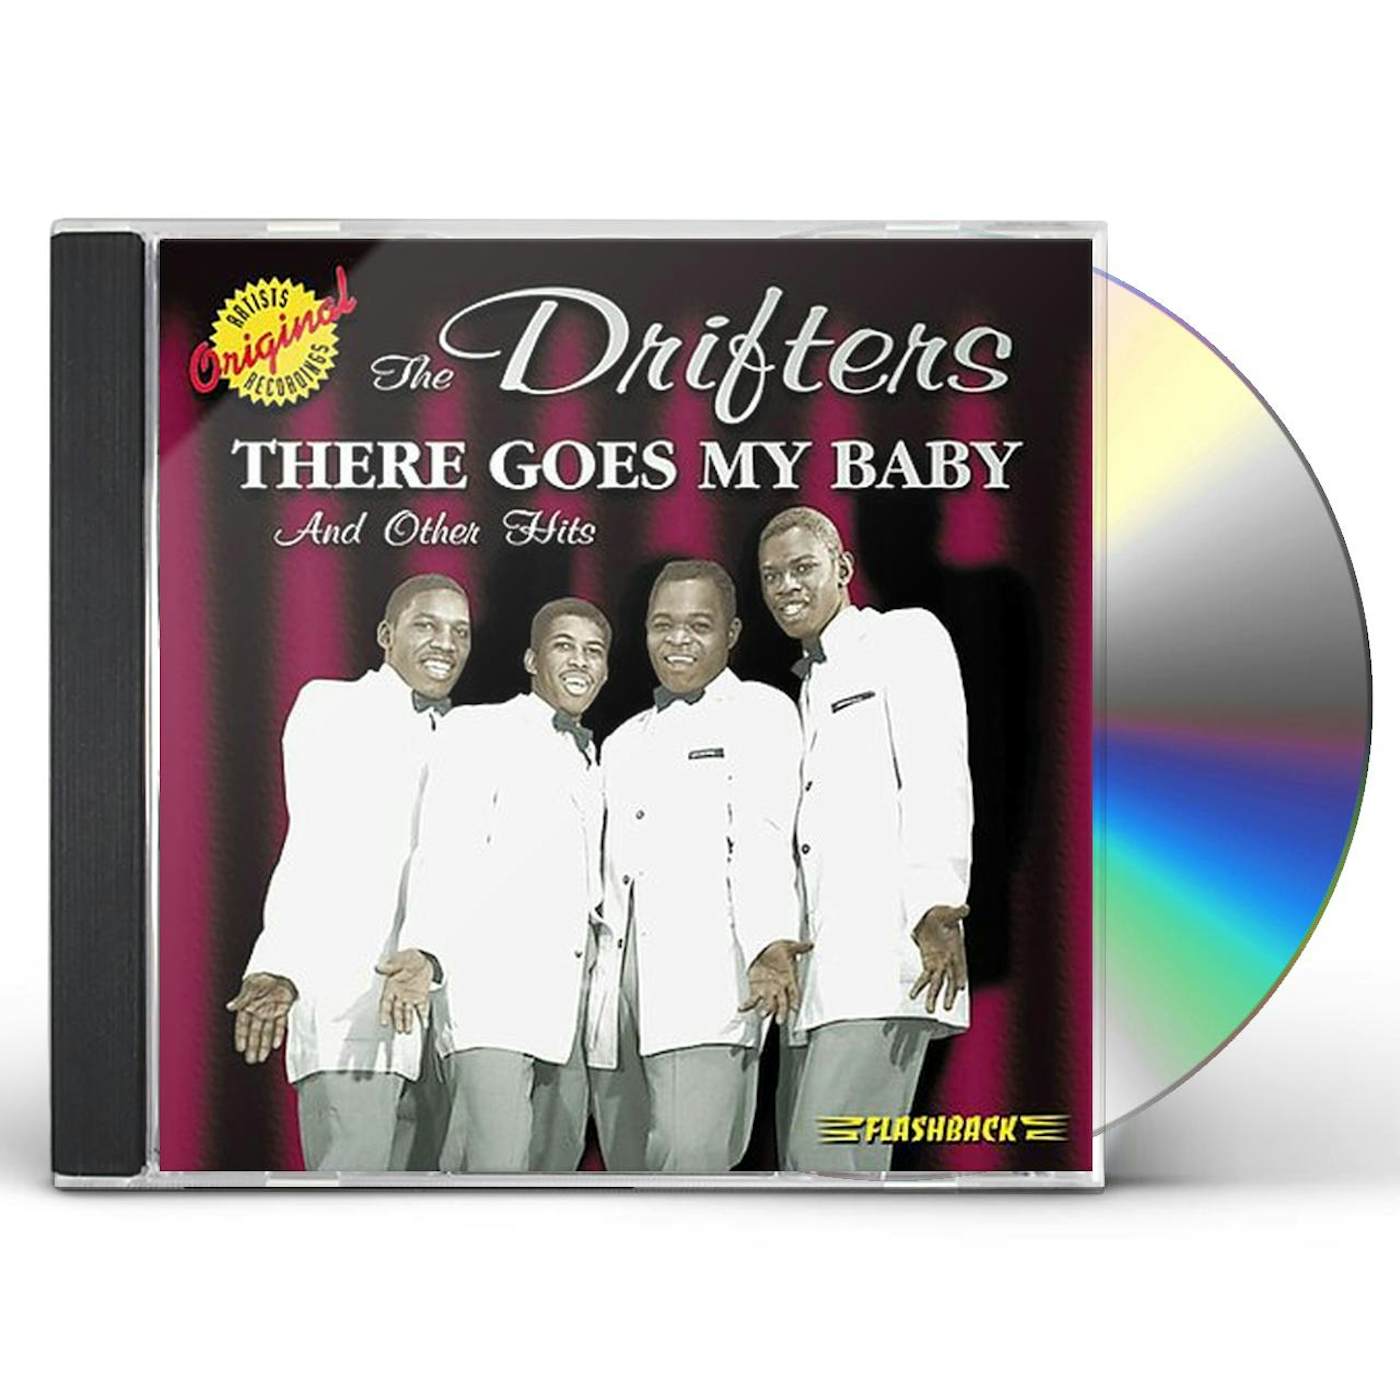 The Drifters THERE GOES MY BABY & OTHER HITS CD